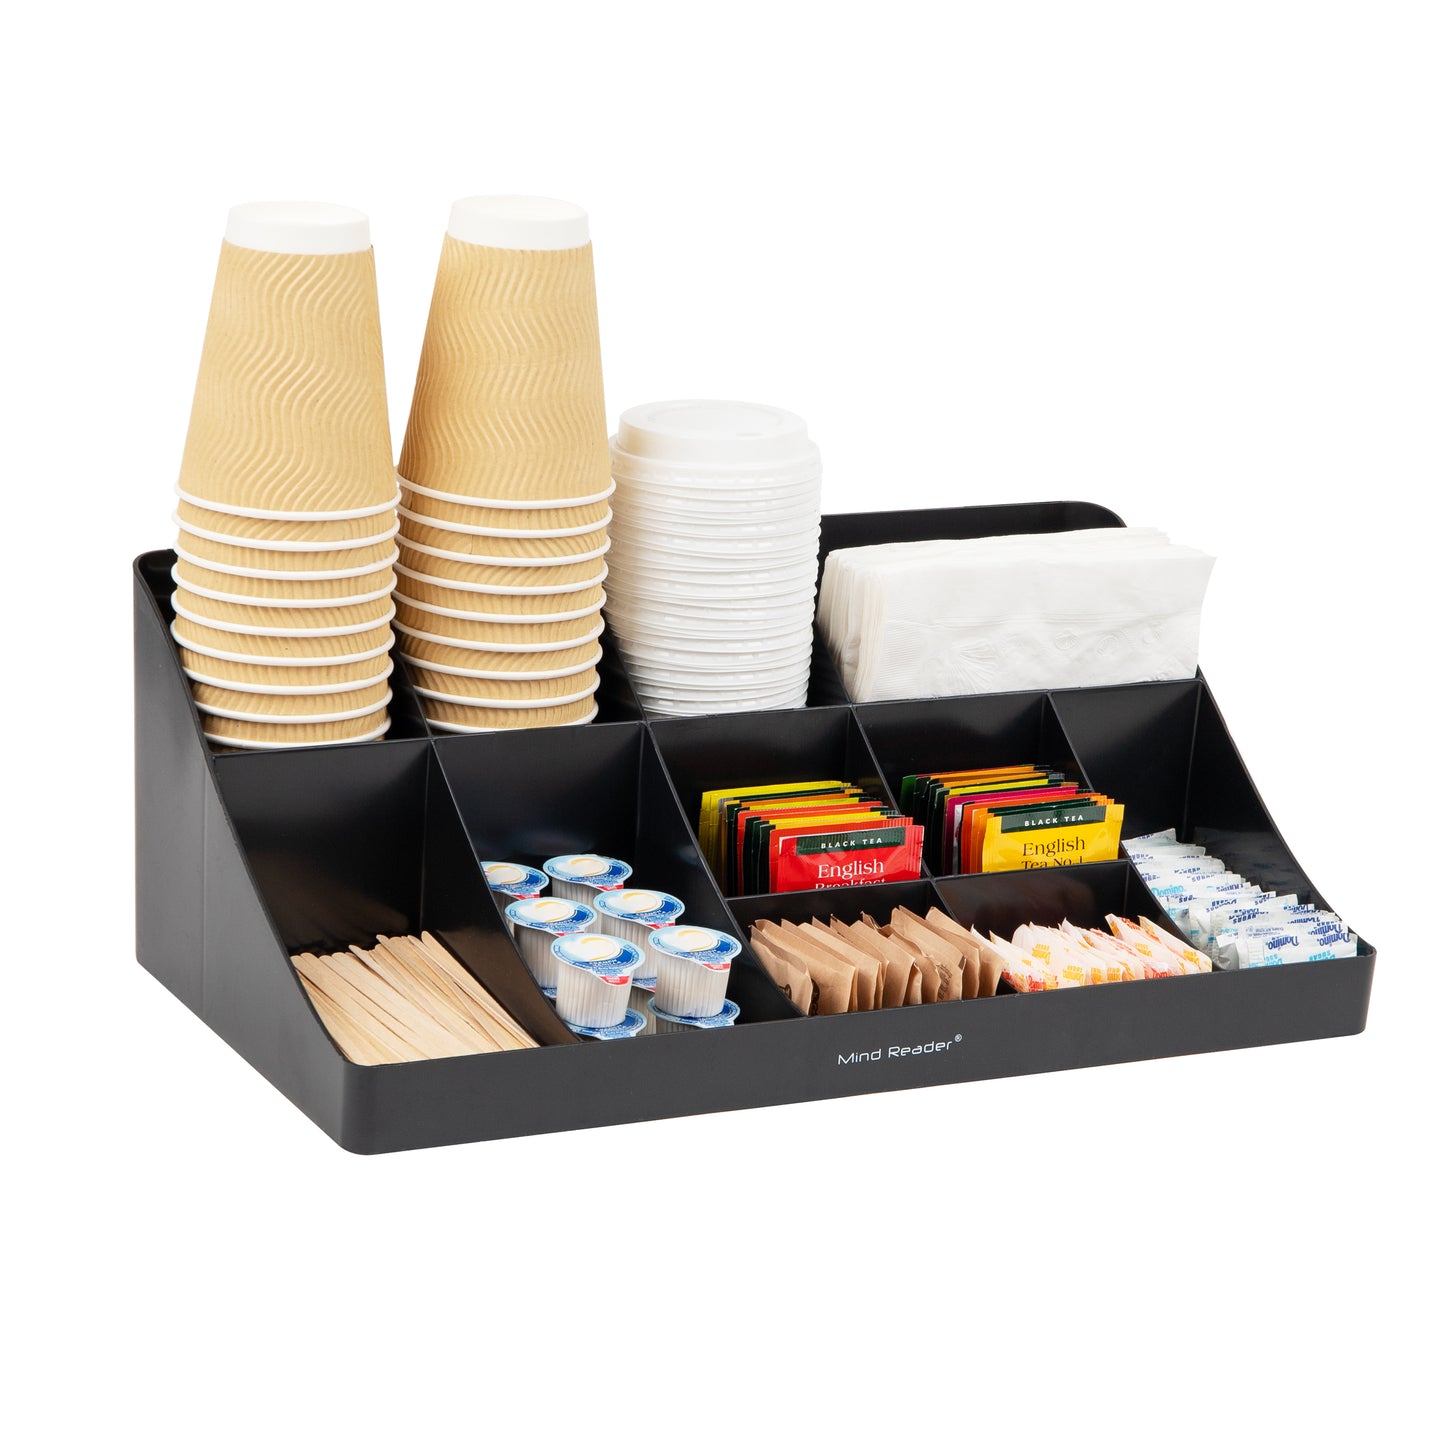 Mind Reader Cup and Condiment Station, Countertop Organizer, Coffee Bar, Kitchen, Stirrers, 17.875"L x 9.5"W x 6.625"H